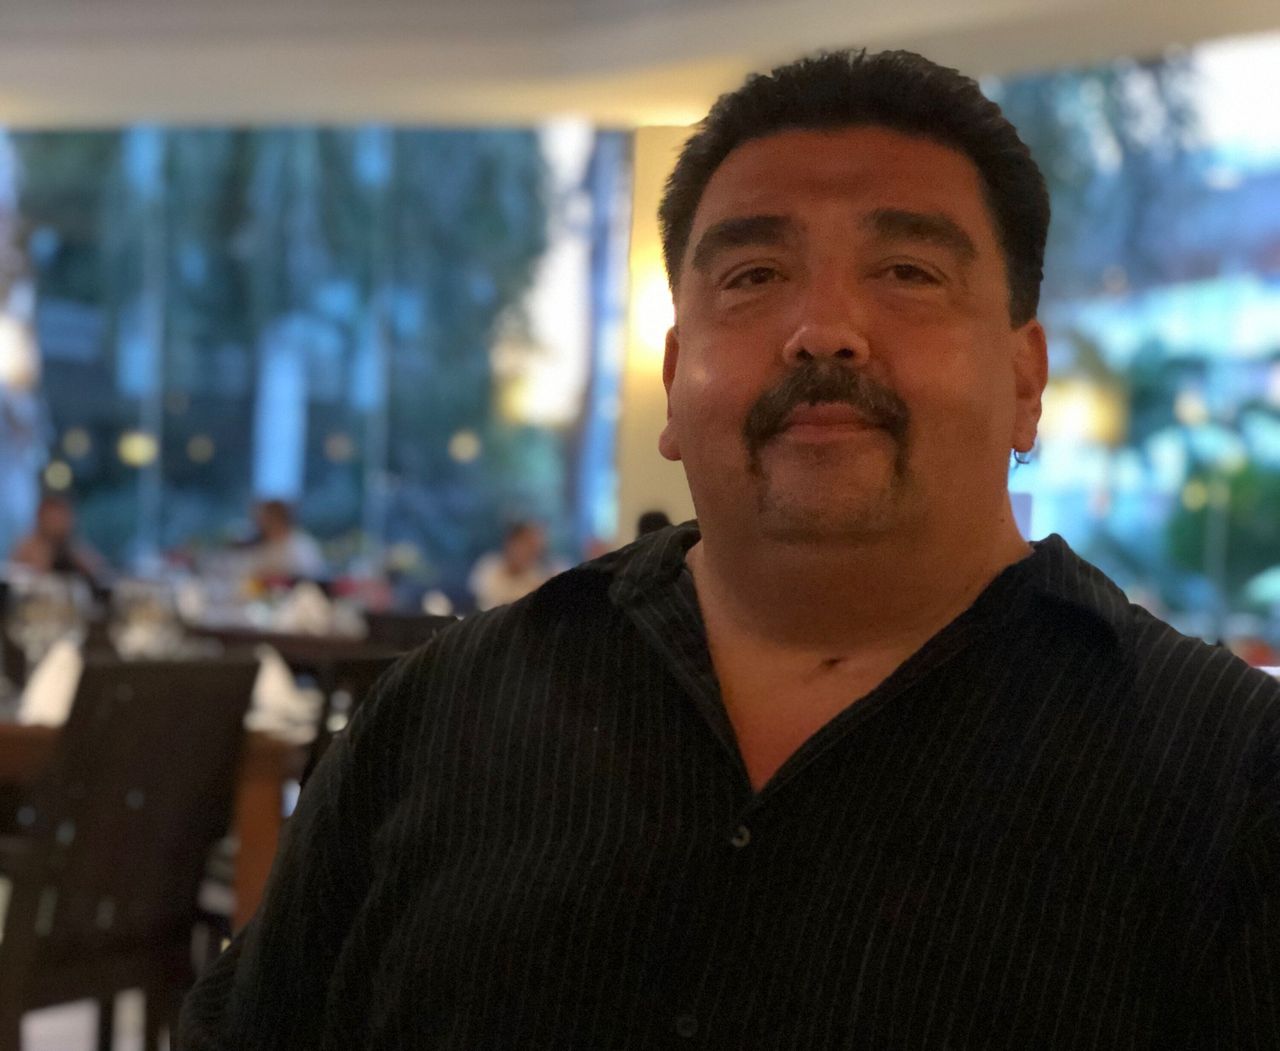 Randy Narvaez on his birthday, July 30, 2019. Narvaez died in May 2020 from the coronavirus.